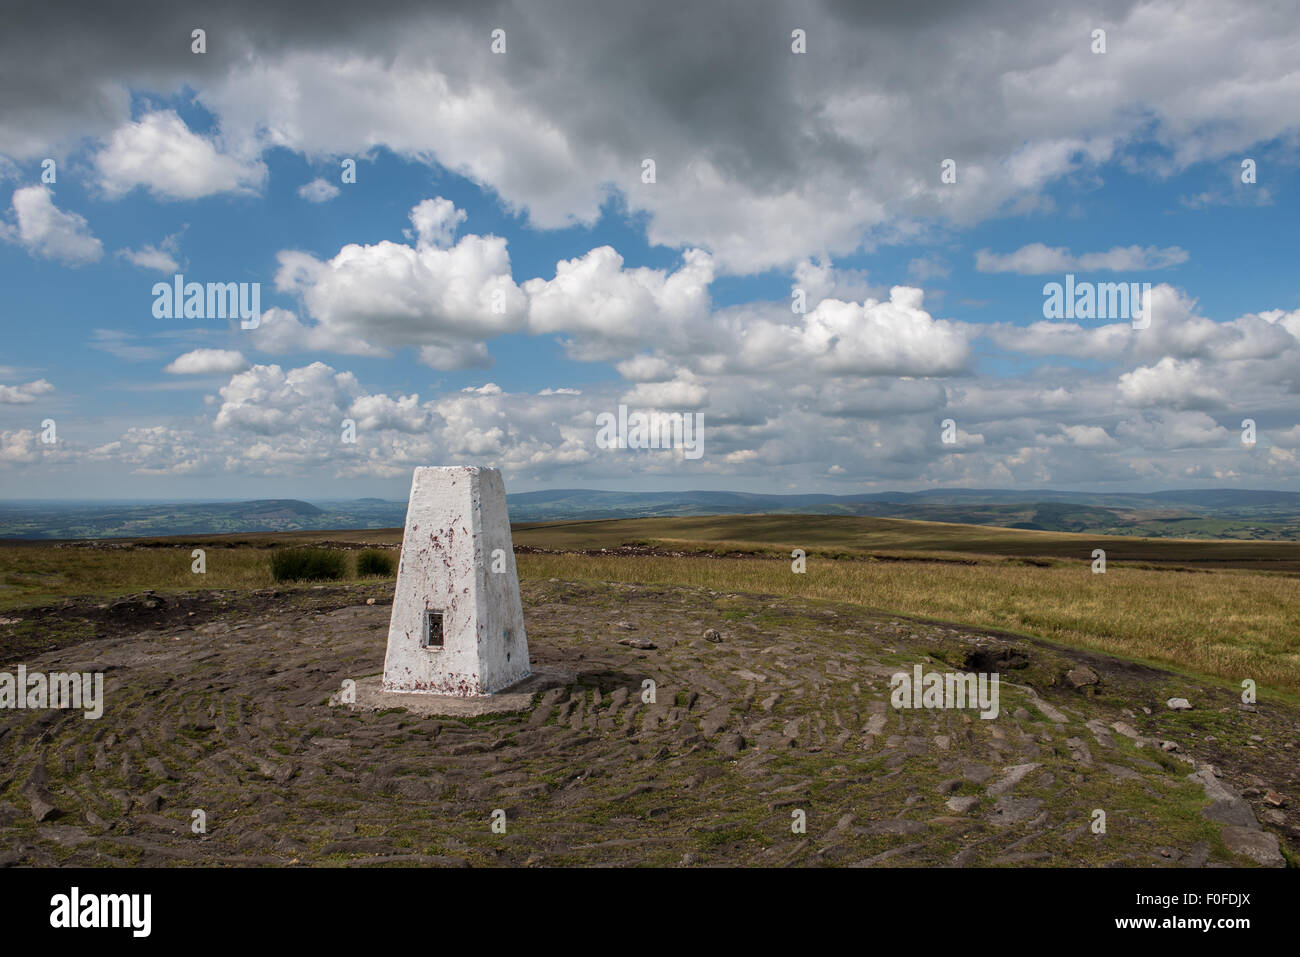 Trig point on summit of Pendle Hill Stock Photo